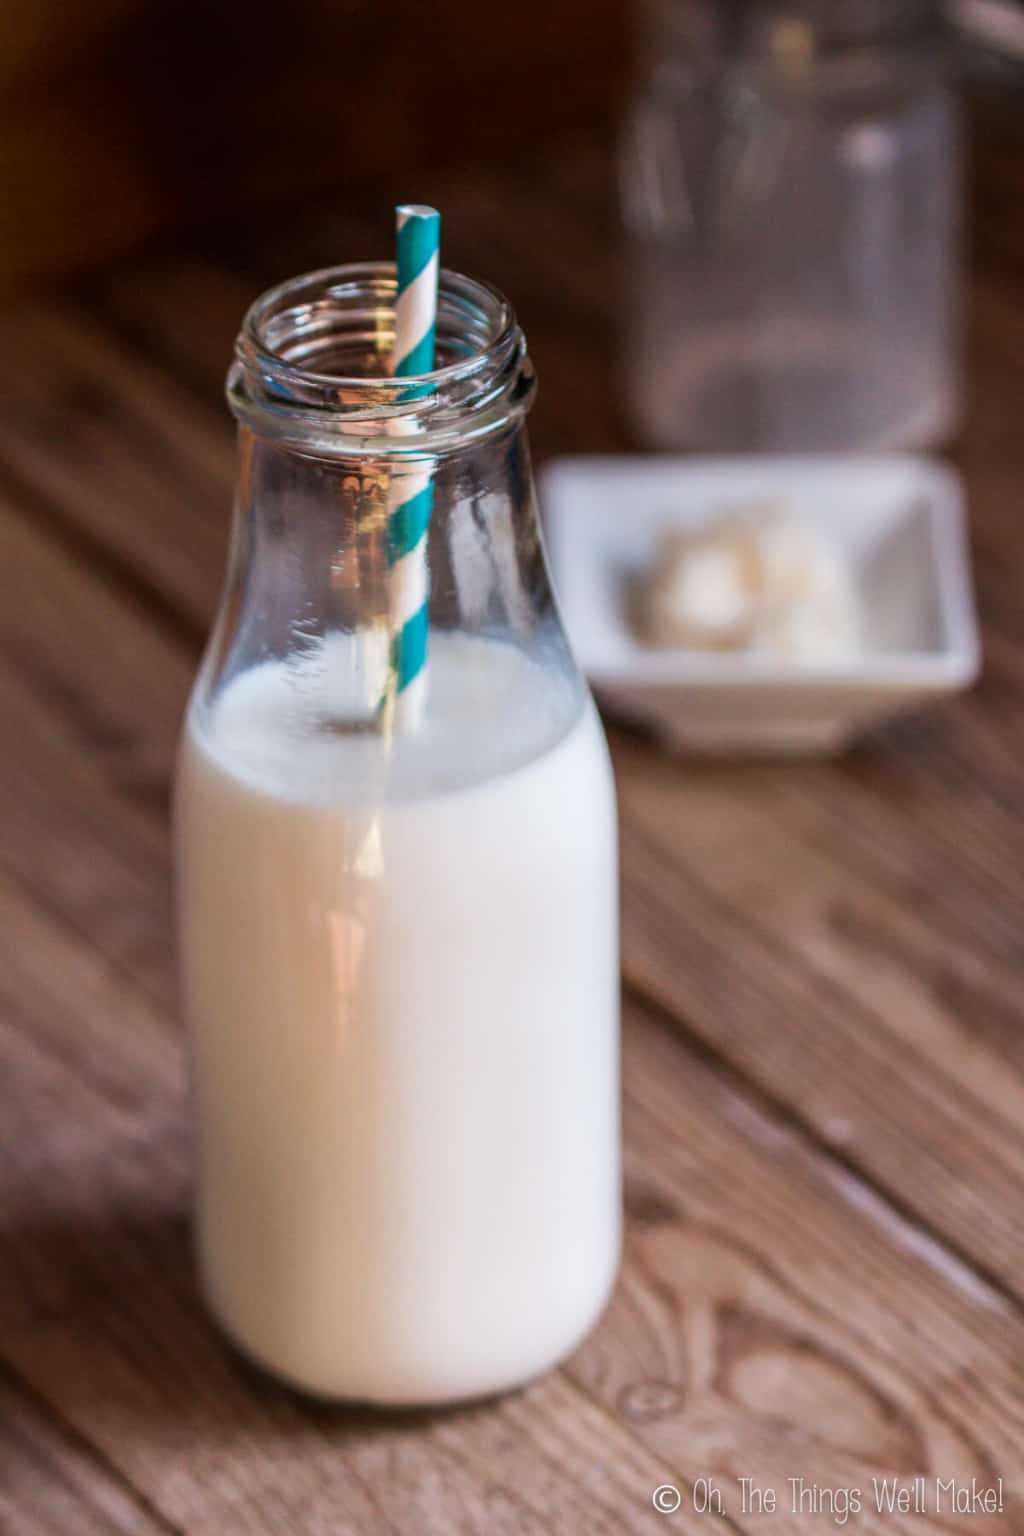 Close up of a bottle of kefir with a white and blue striped paper straw in it, next to  a small plate filled with some kefir grains.